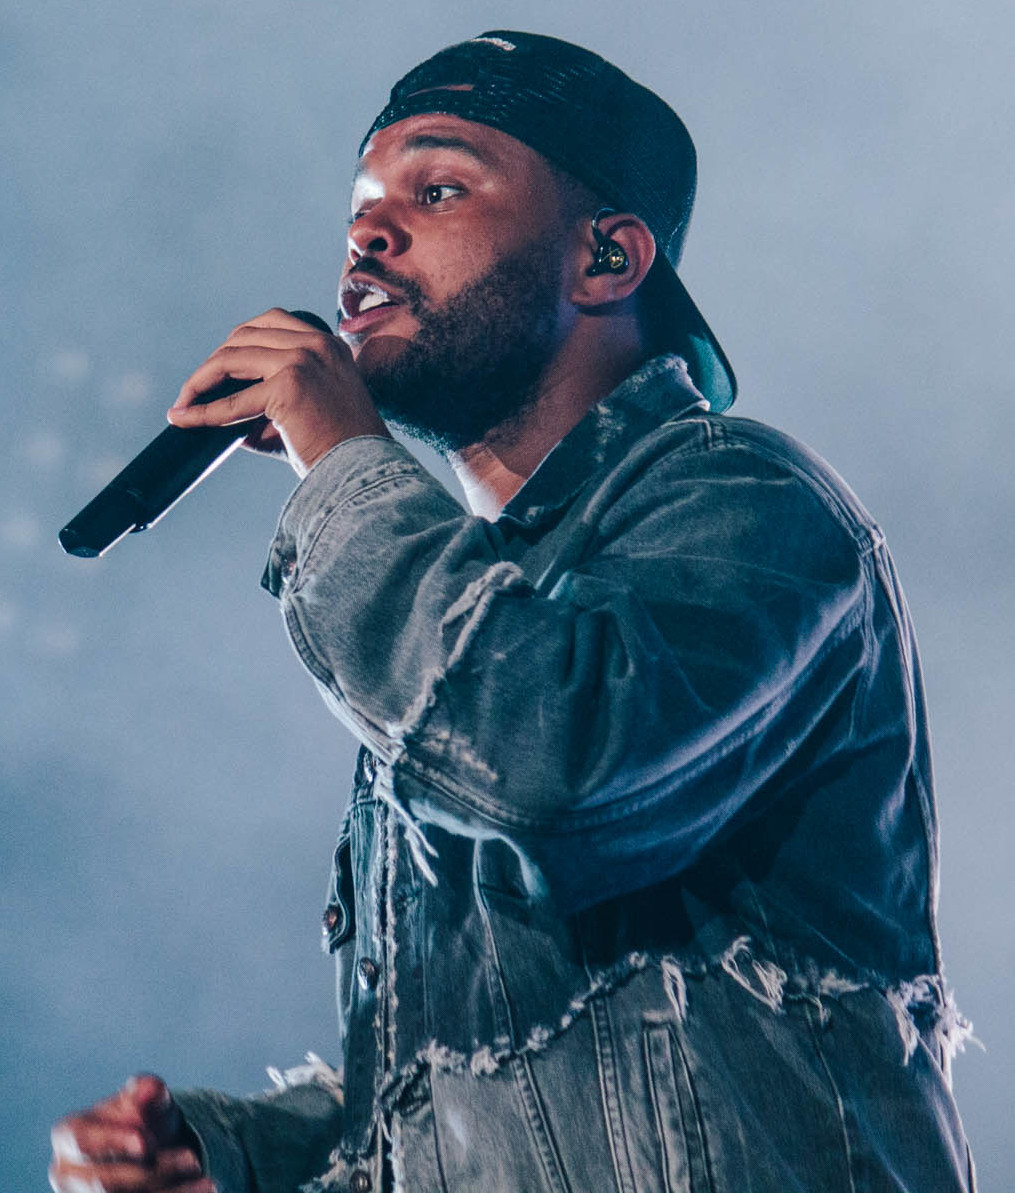 Singer The Weeknd wants to kill his stage name to be reborn